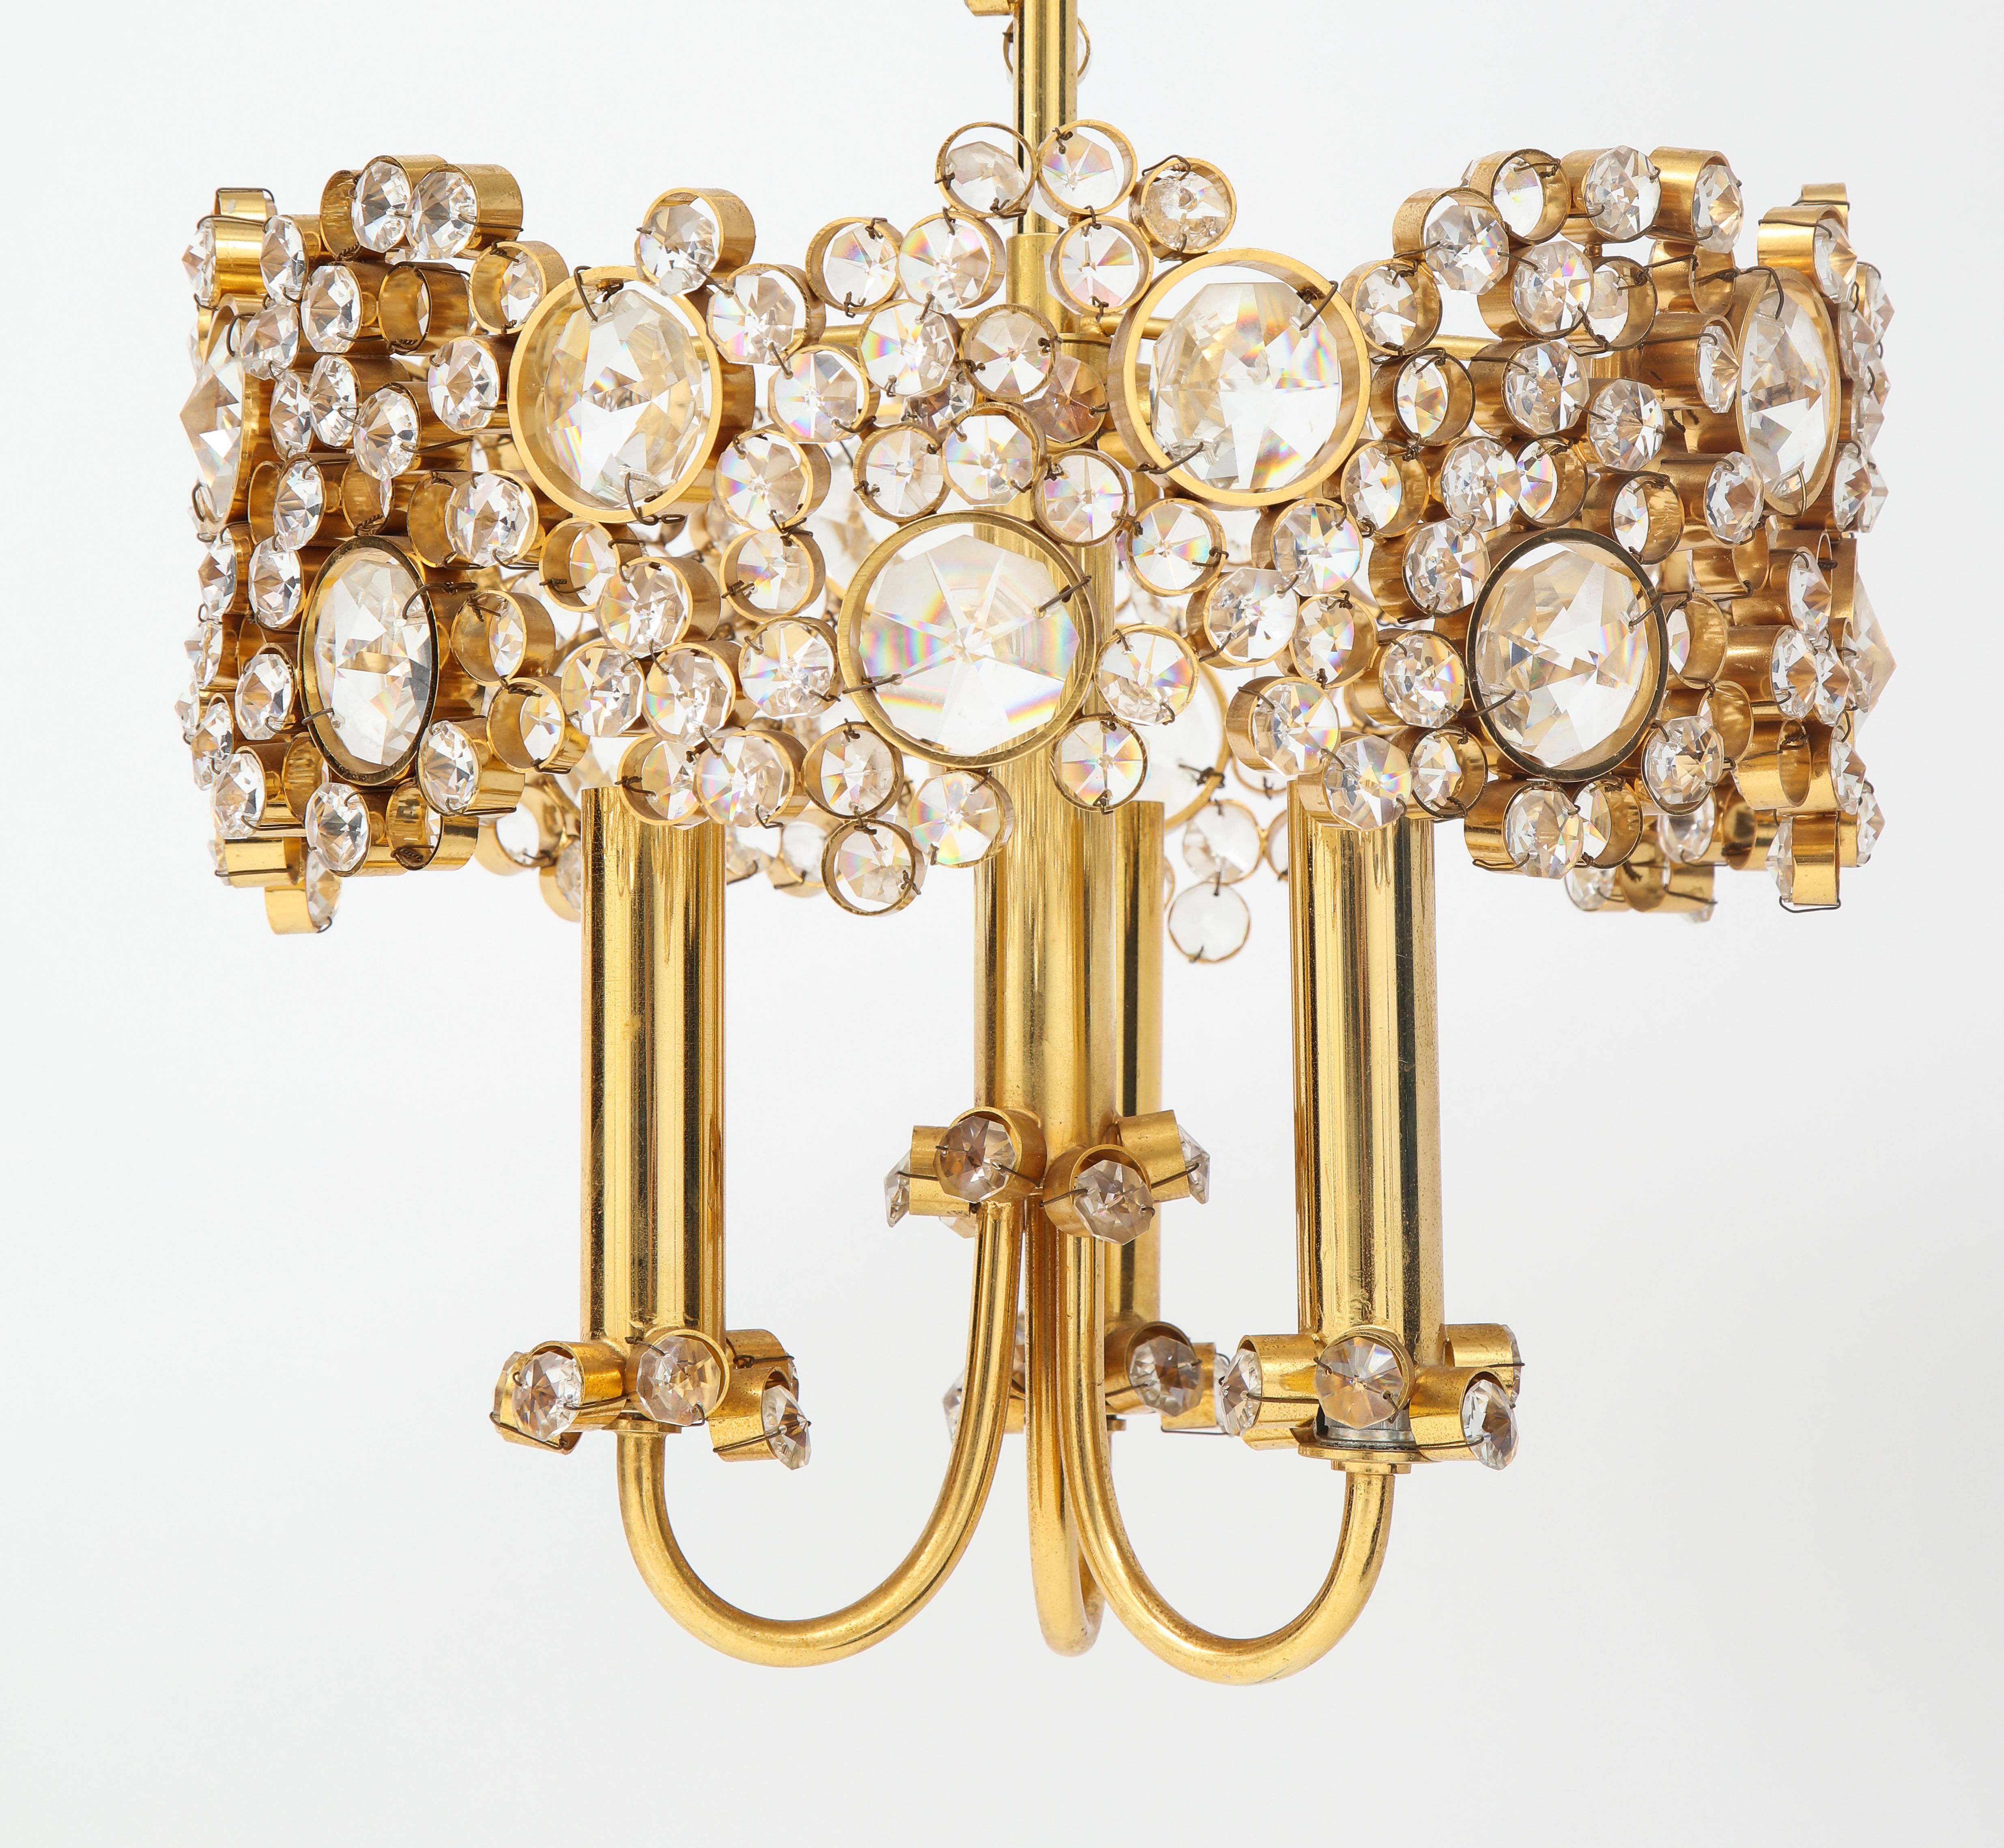 Hollywood Regency Gold-Plated and Crystal Chandelier by Palwa